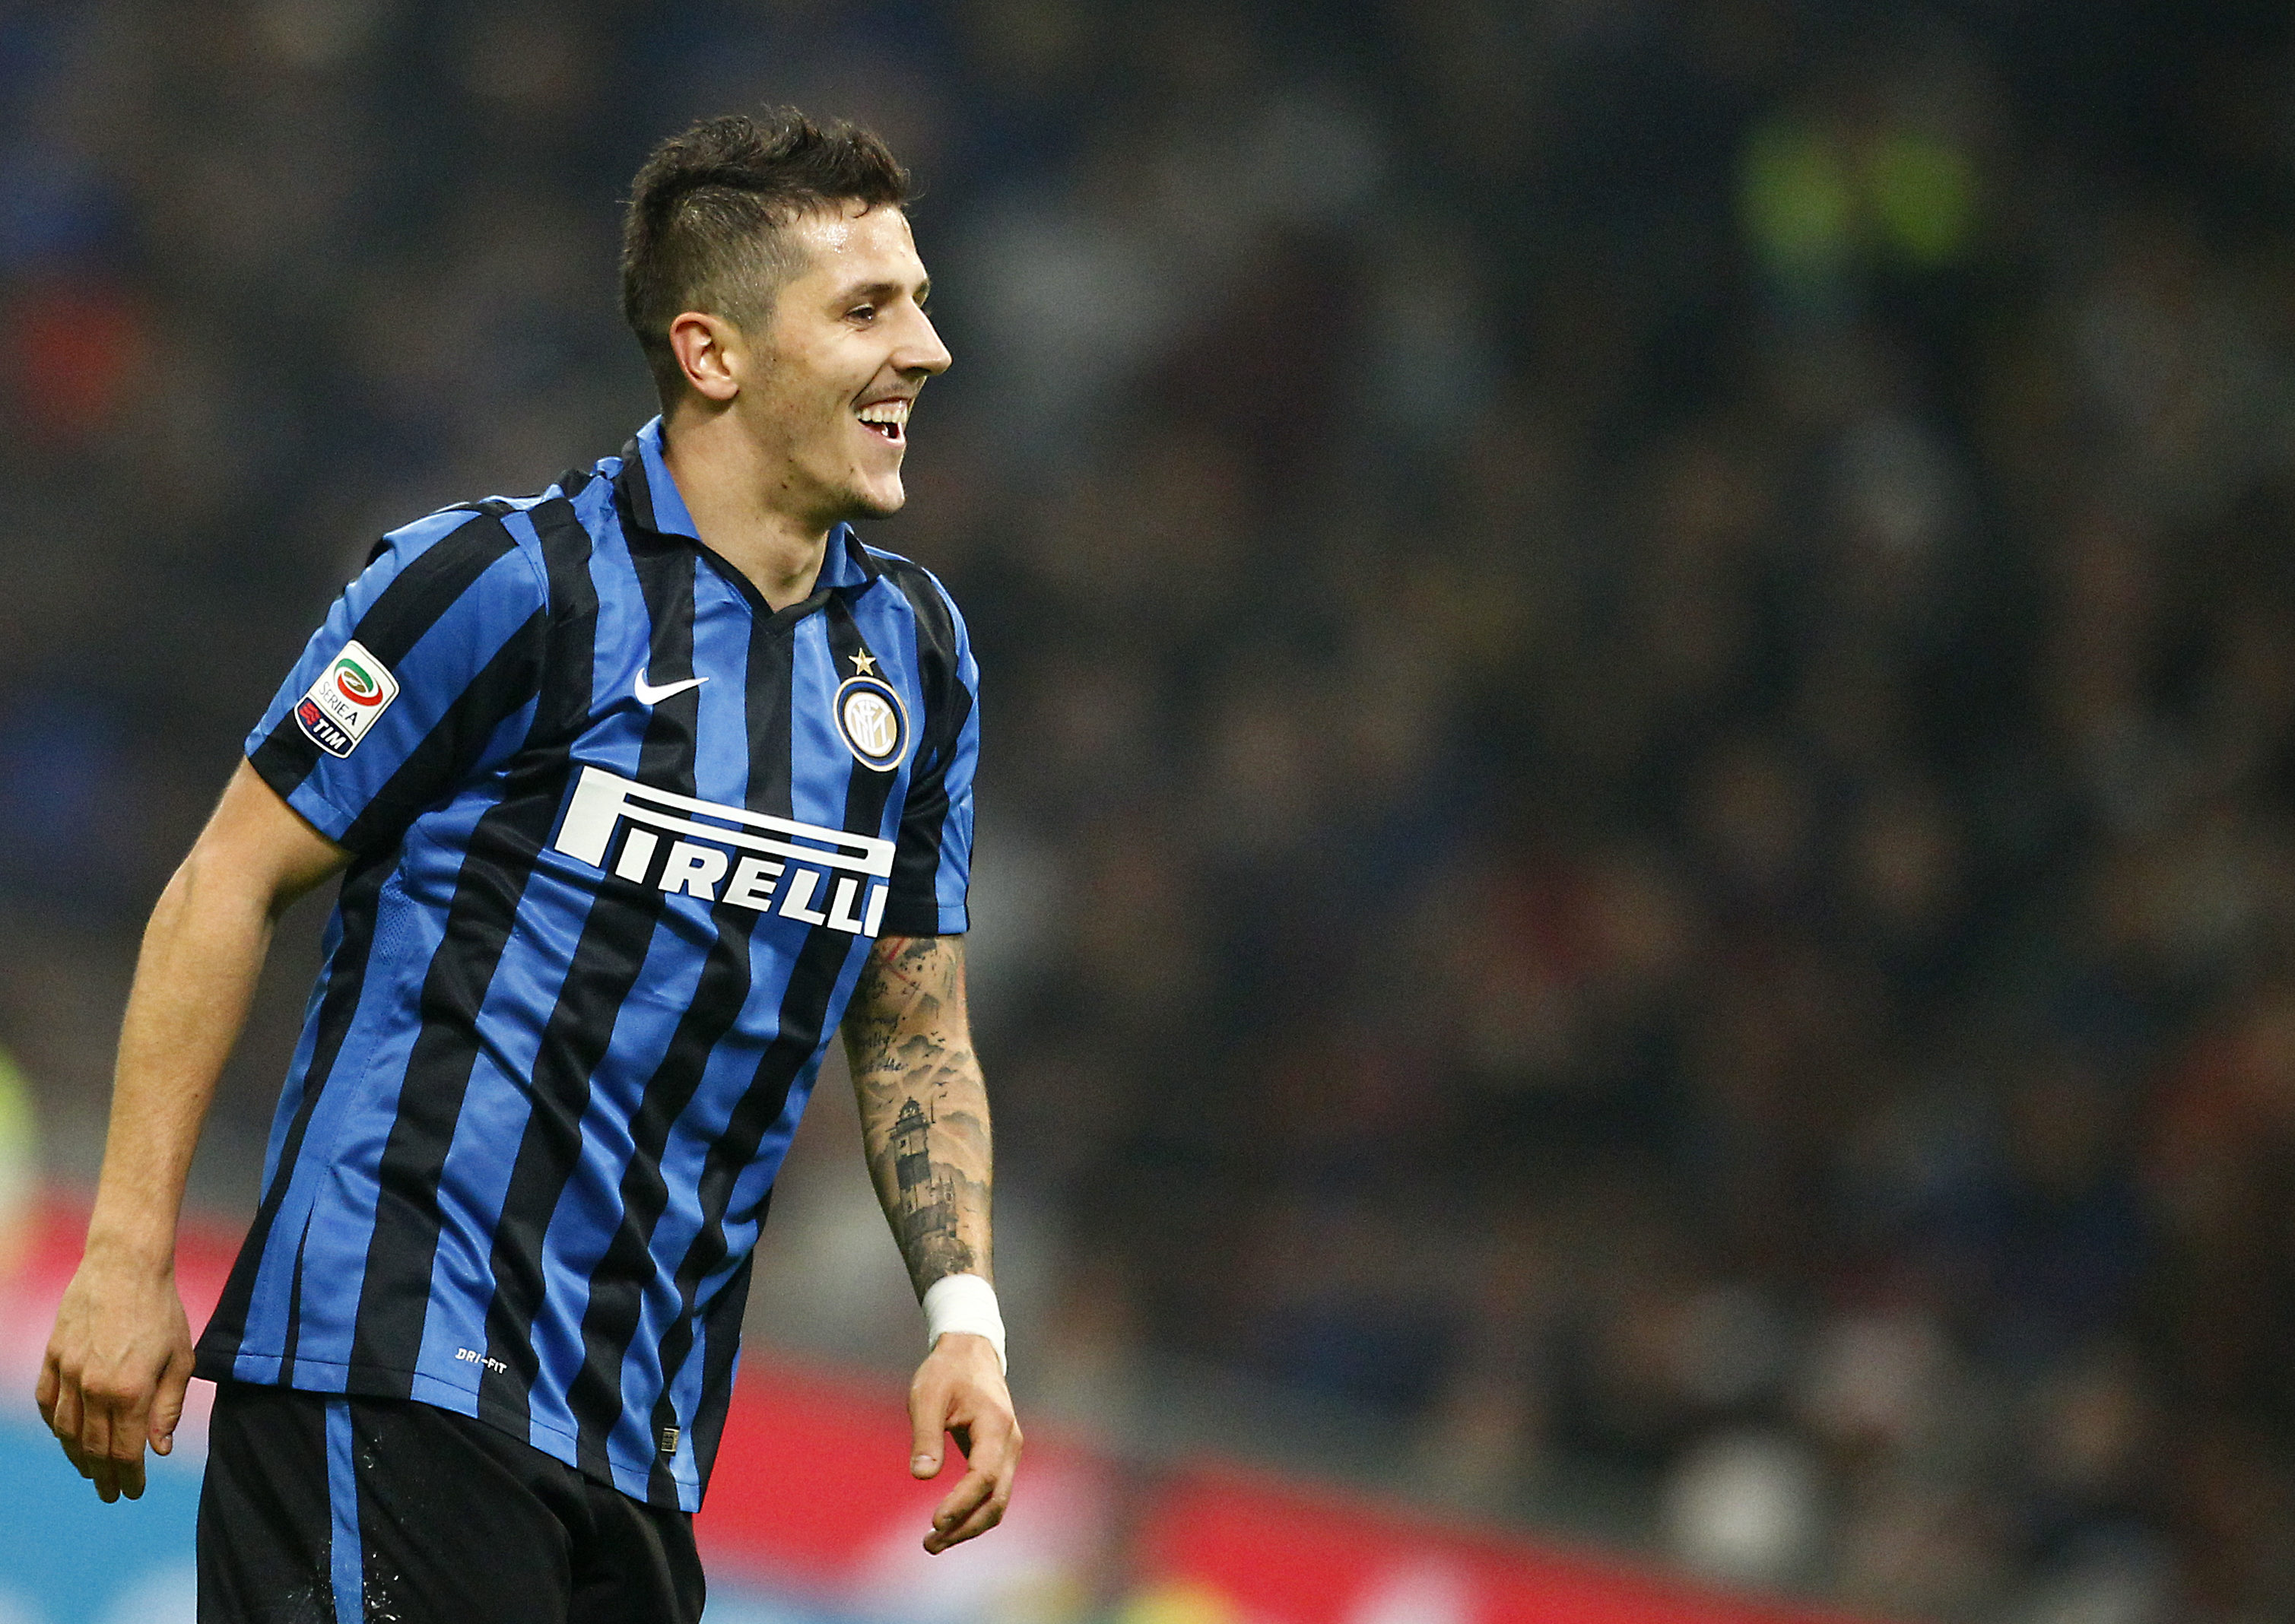 TS – An offer for Jovetic could open for Lavezzi